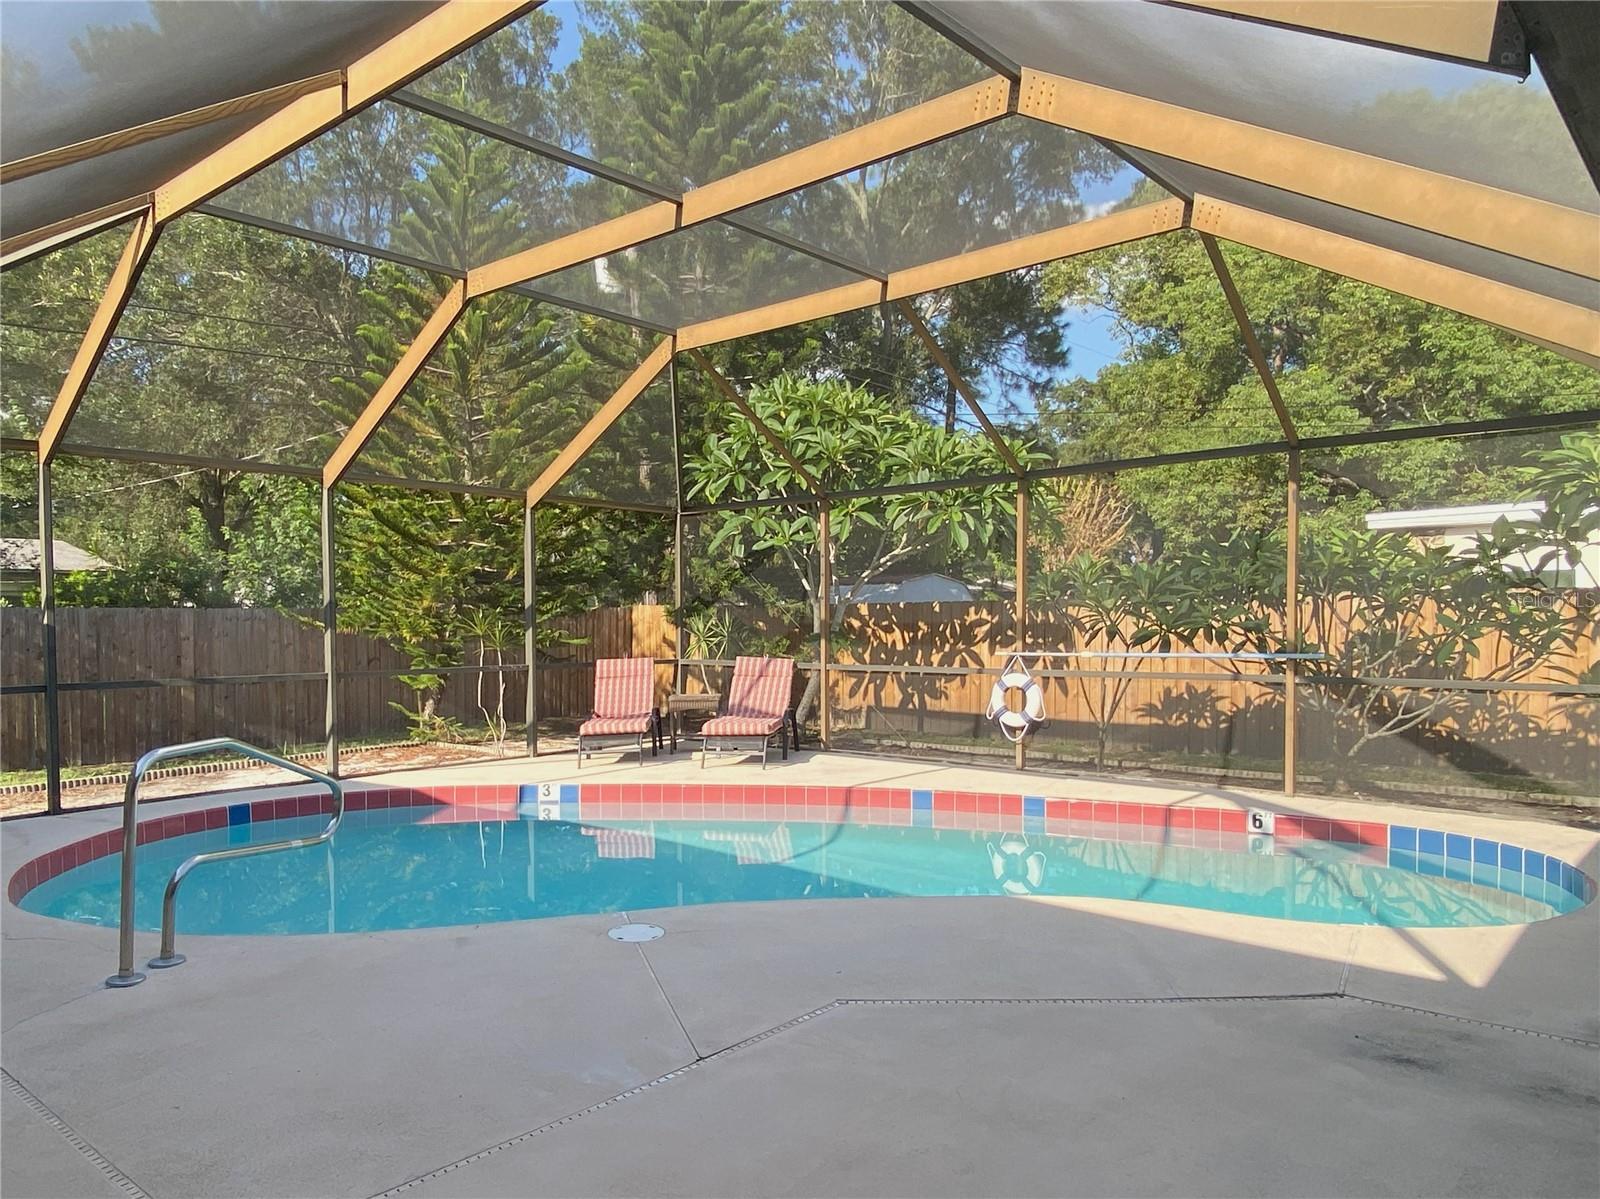 Private screened in pool with covered lanai